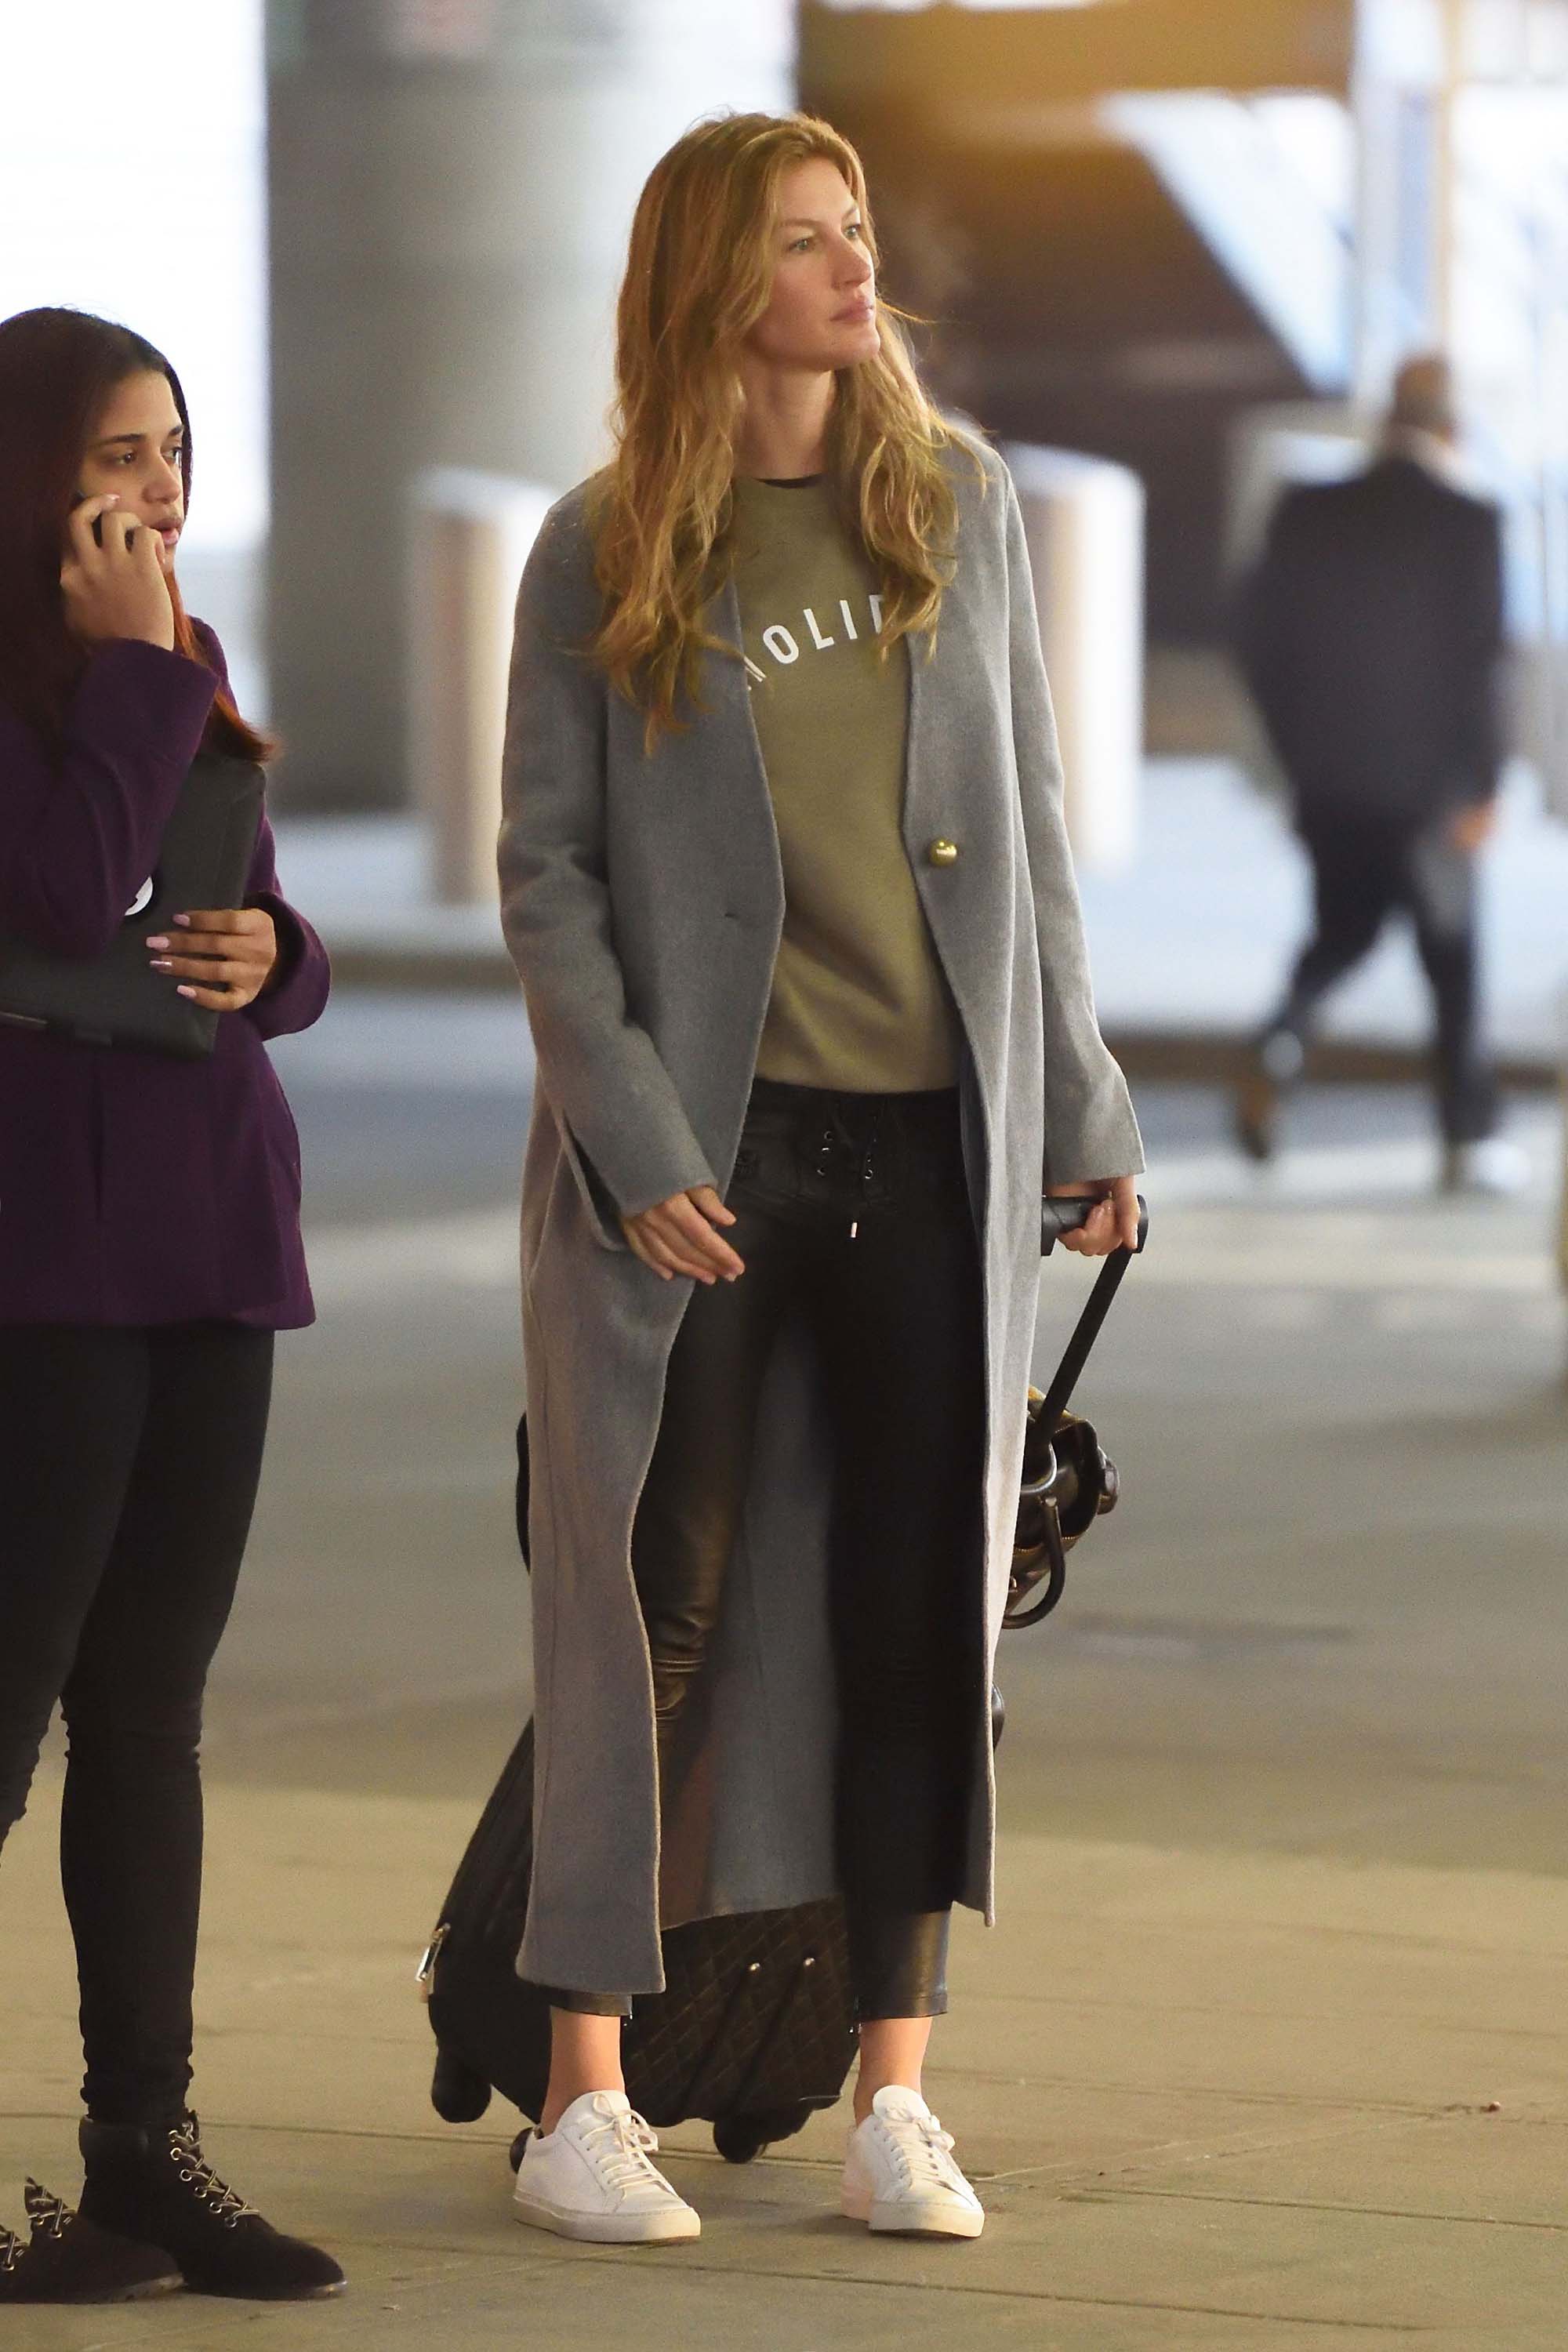 Gisele Bundchen arrives JFK Airport this morning to catch a flight out